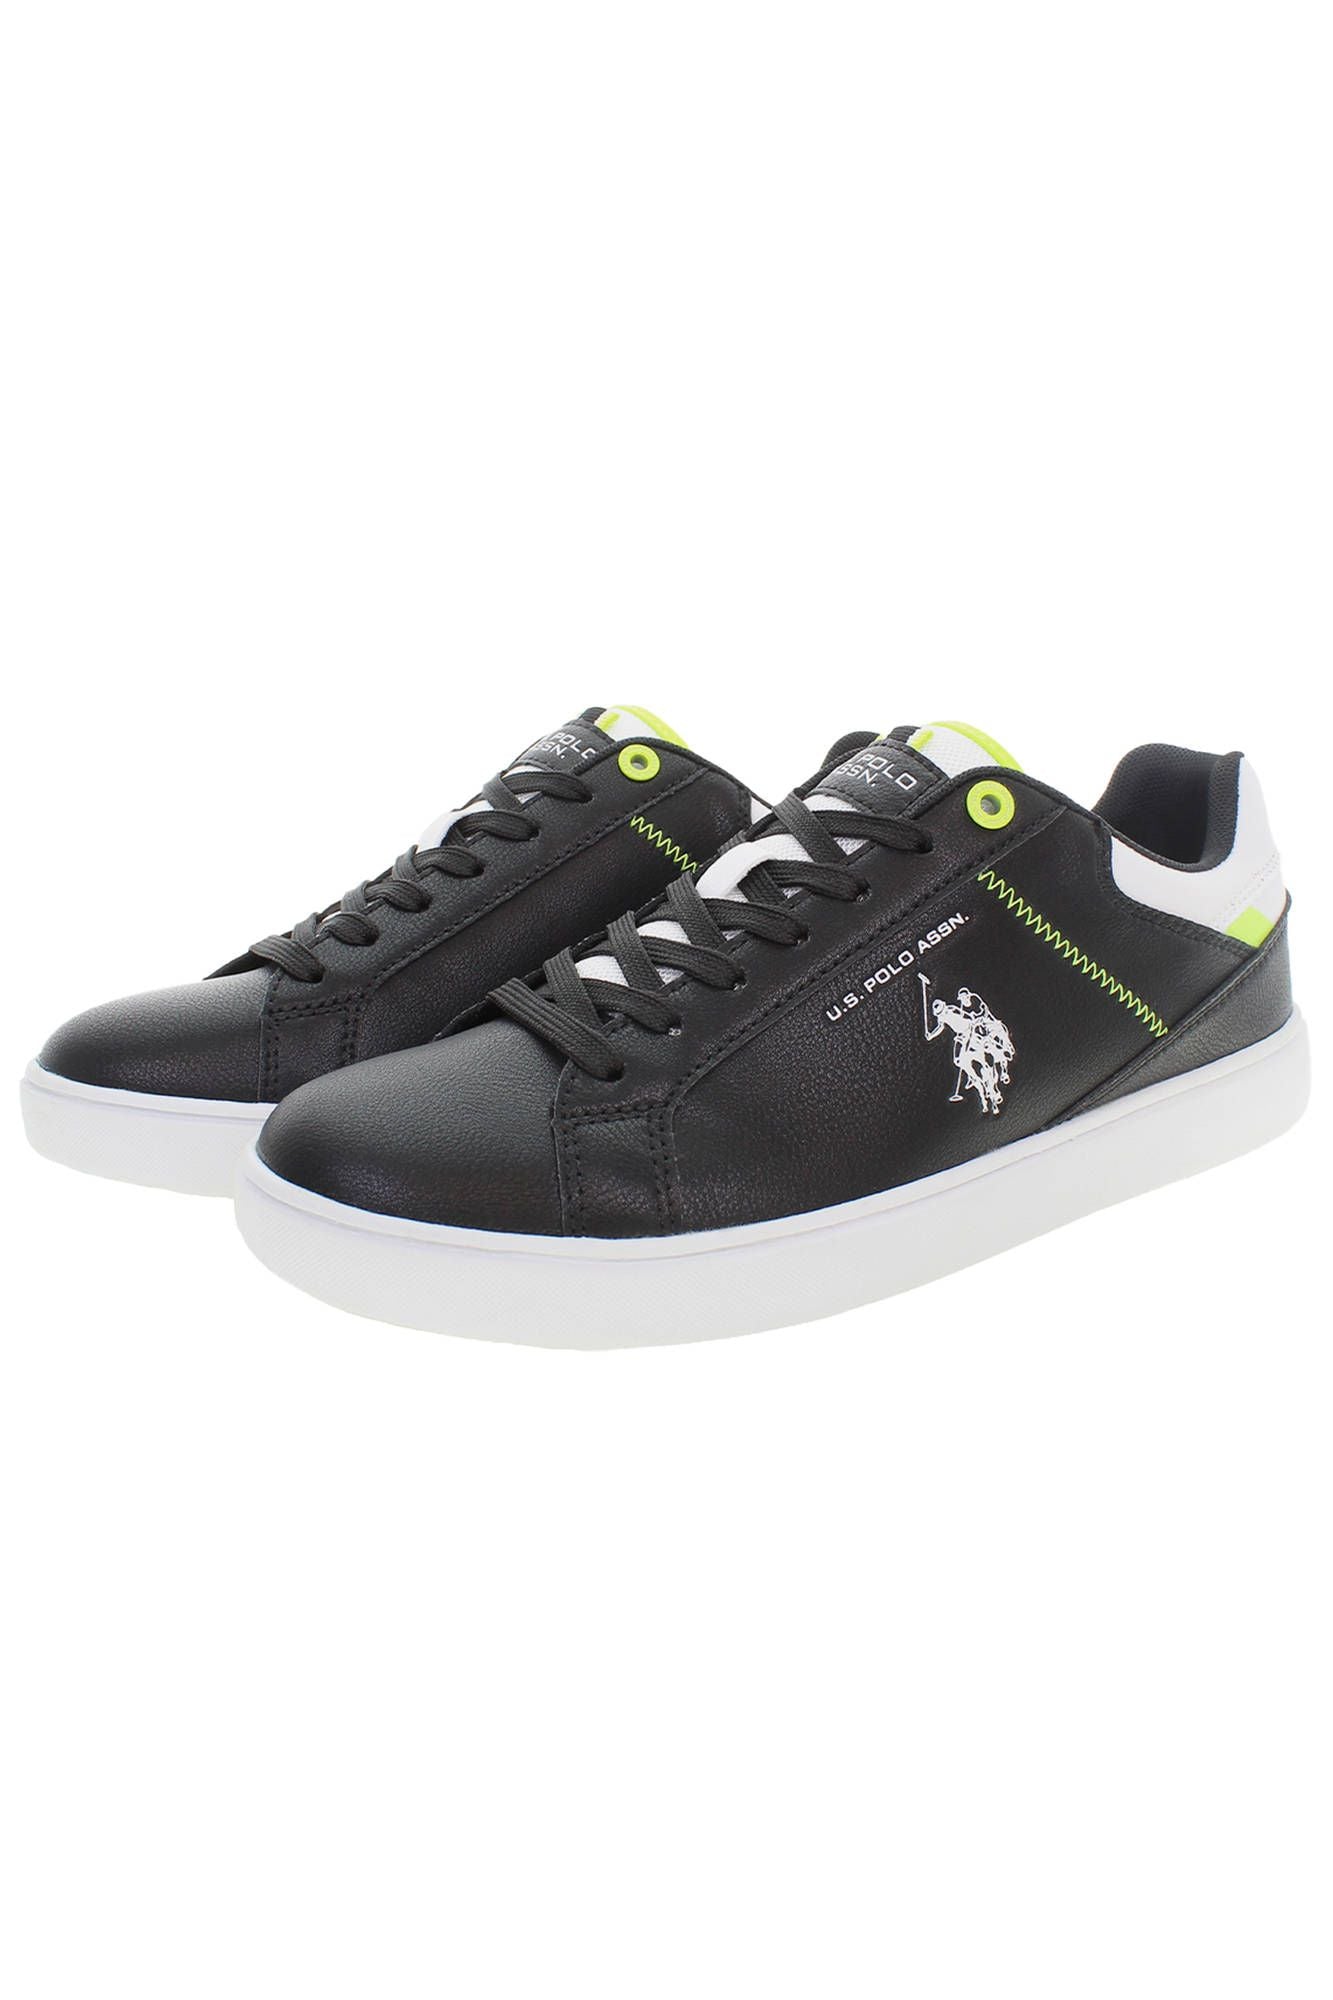 U.S. POLO ASSN. Elegant Black Lace-Up Sneakers